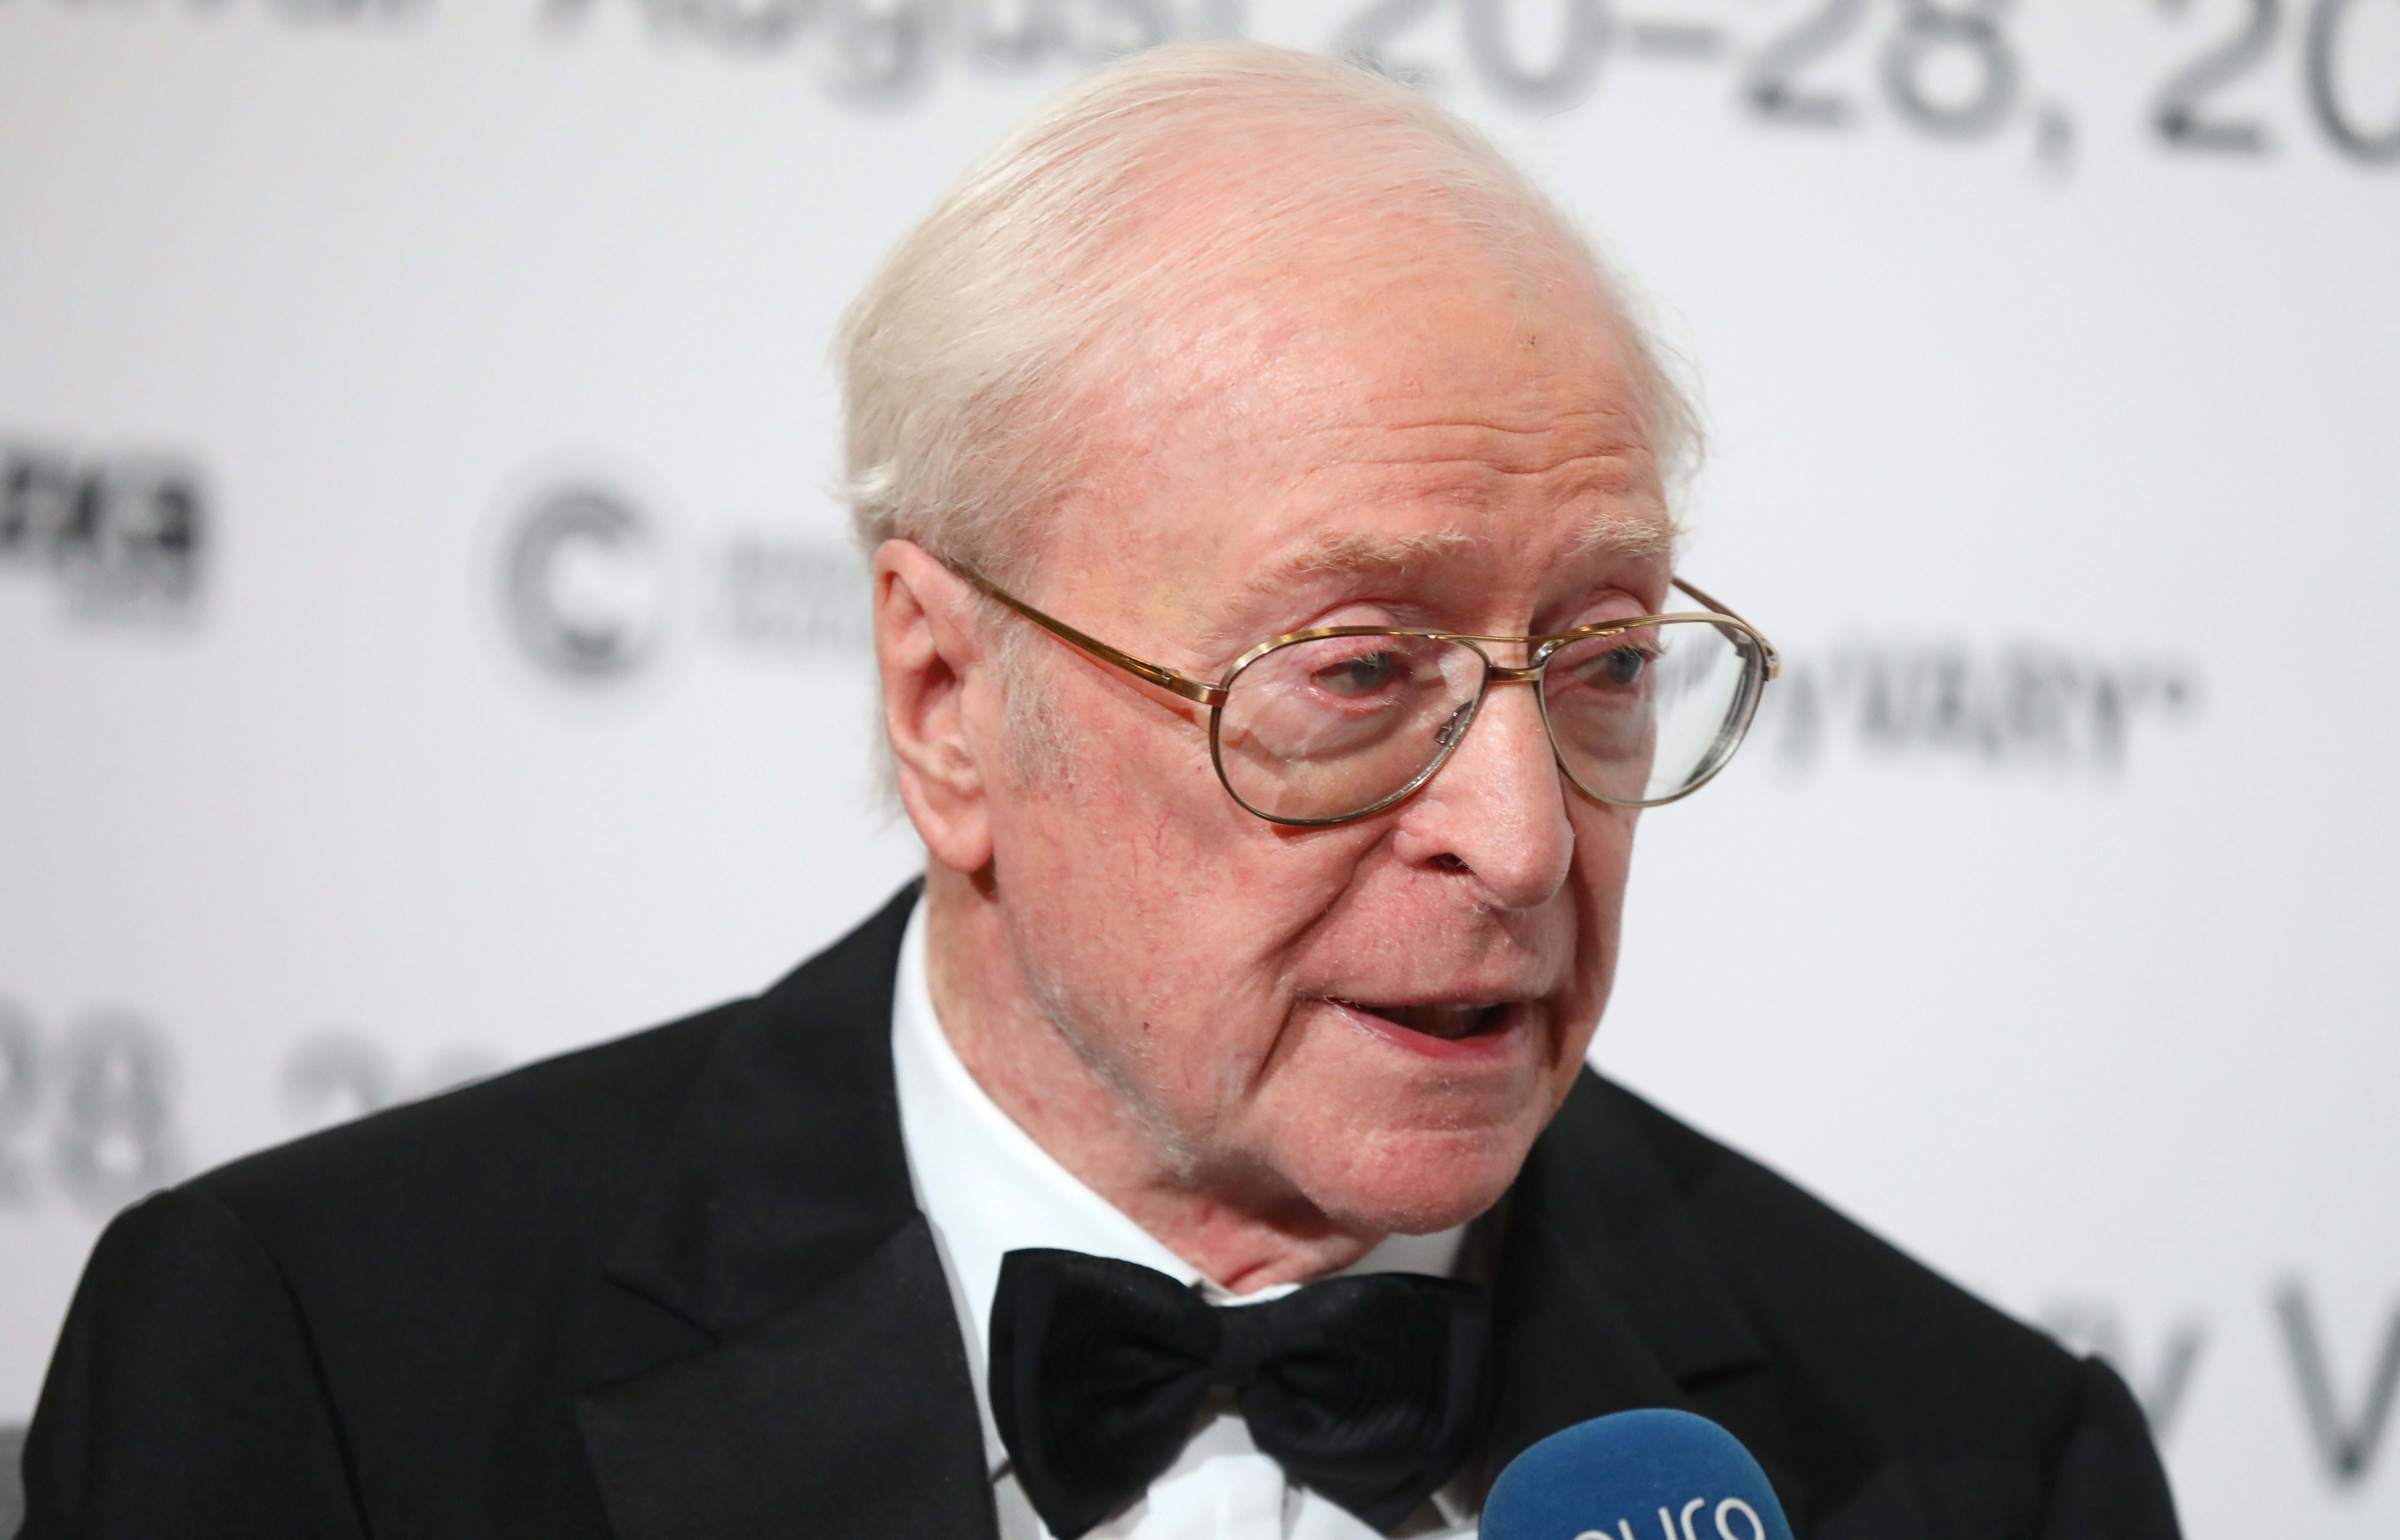 Michael Caine at the 55th Karlovy Vary International Film Festival on August 20, 2021, in Karlovy Vary, Czech Republic | Source: Getty Images